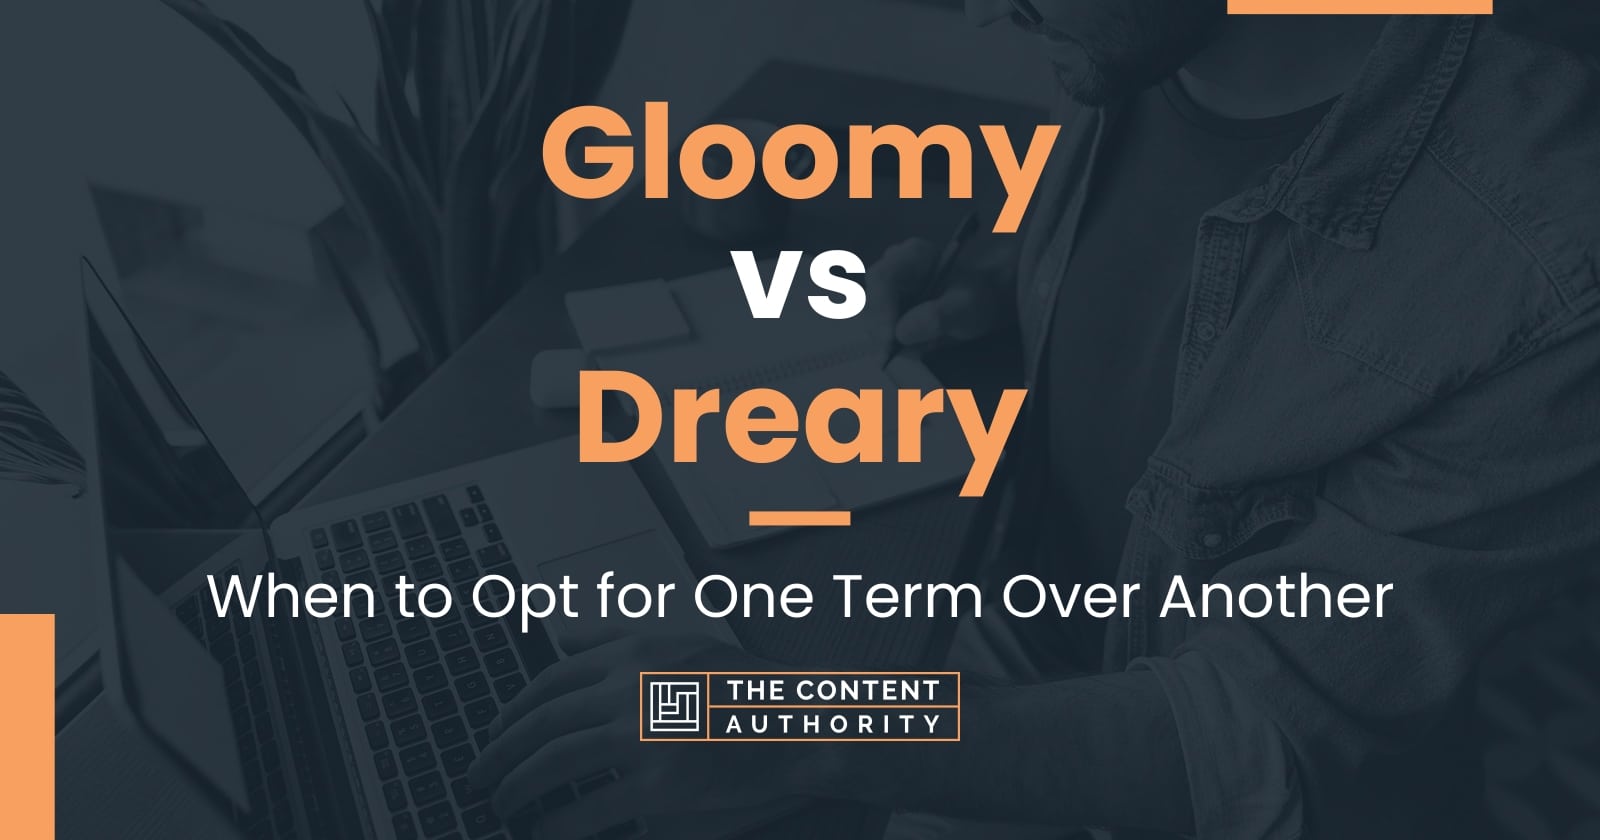 Gloomy vs Dreary: When to Opt for One Term Over Another